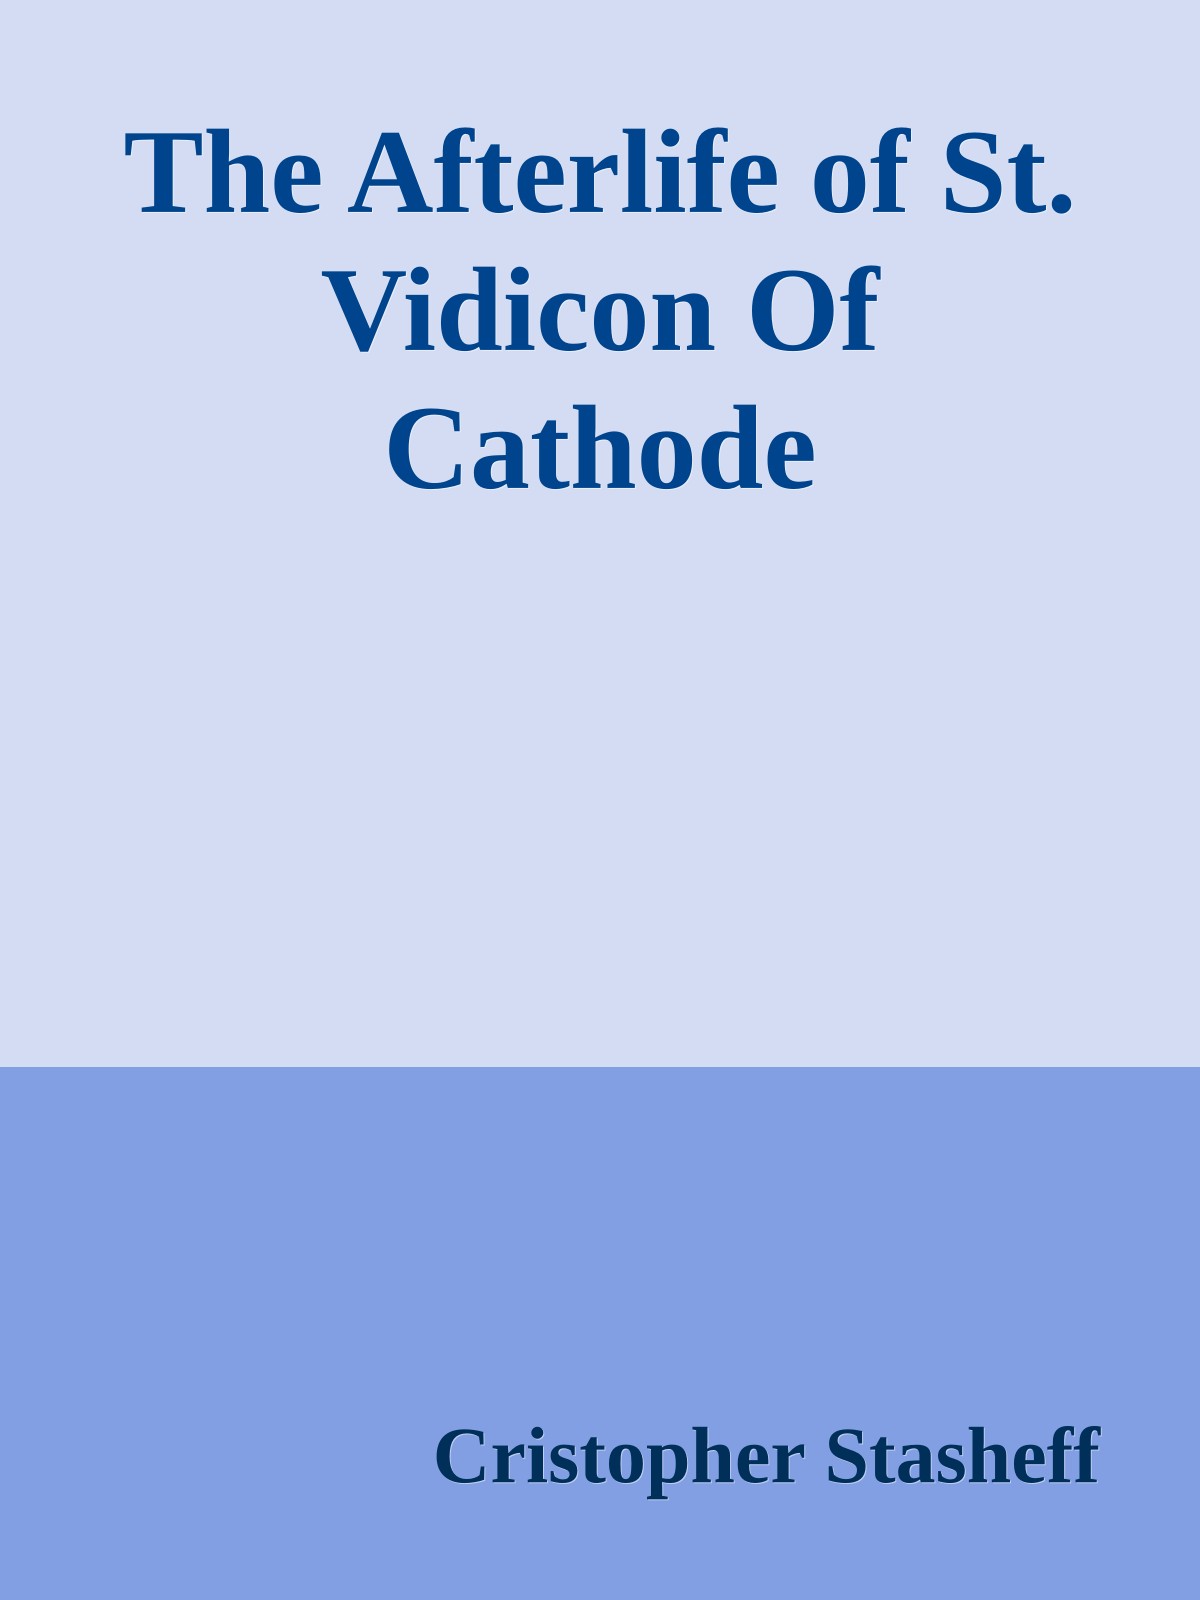 The Afterlife of St. Vidicon Of Cathode